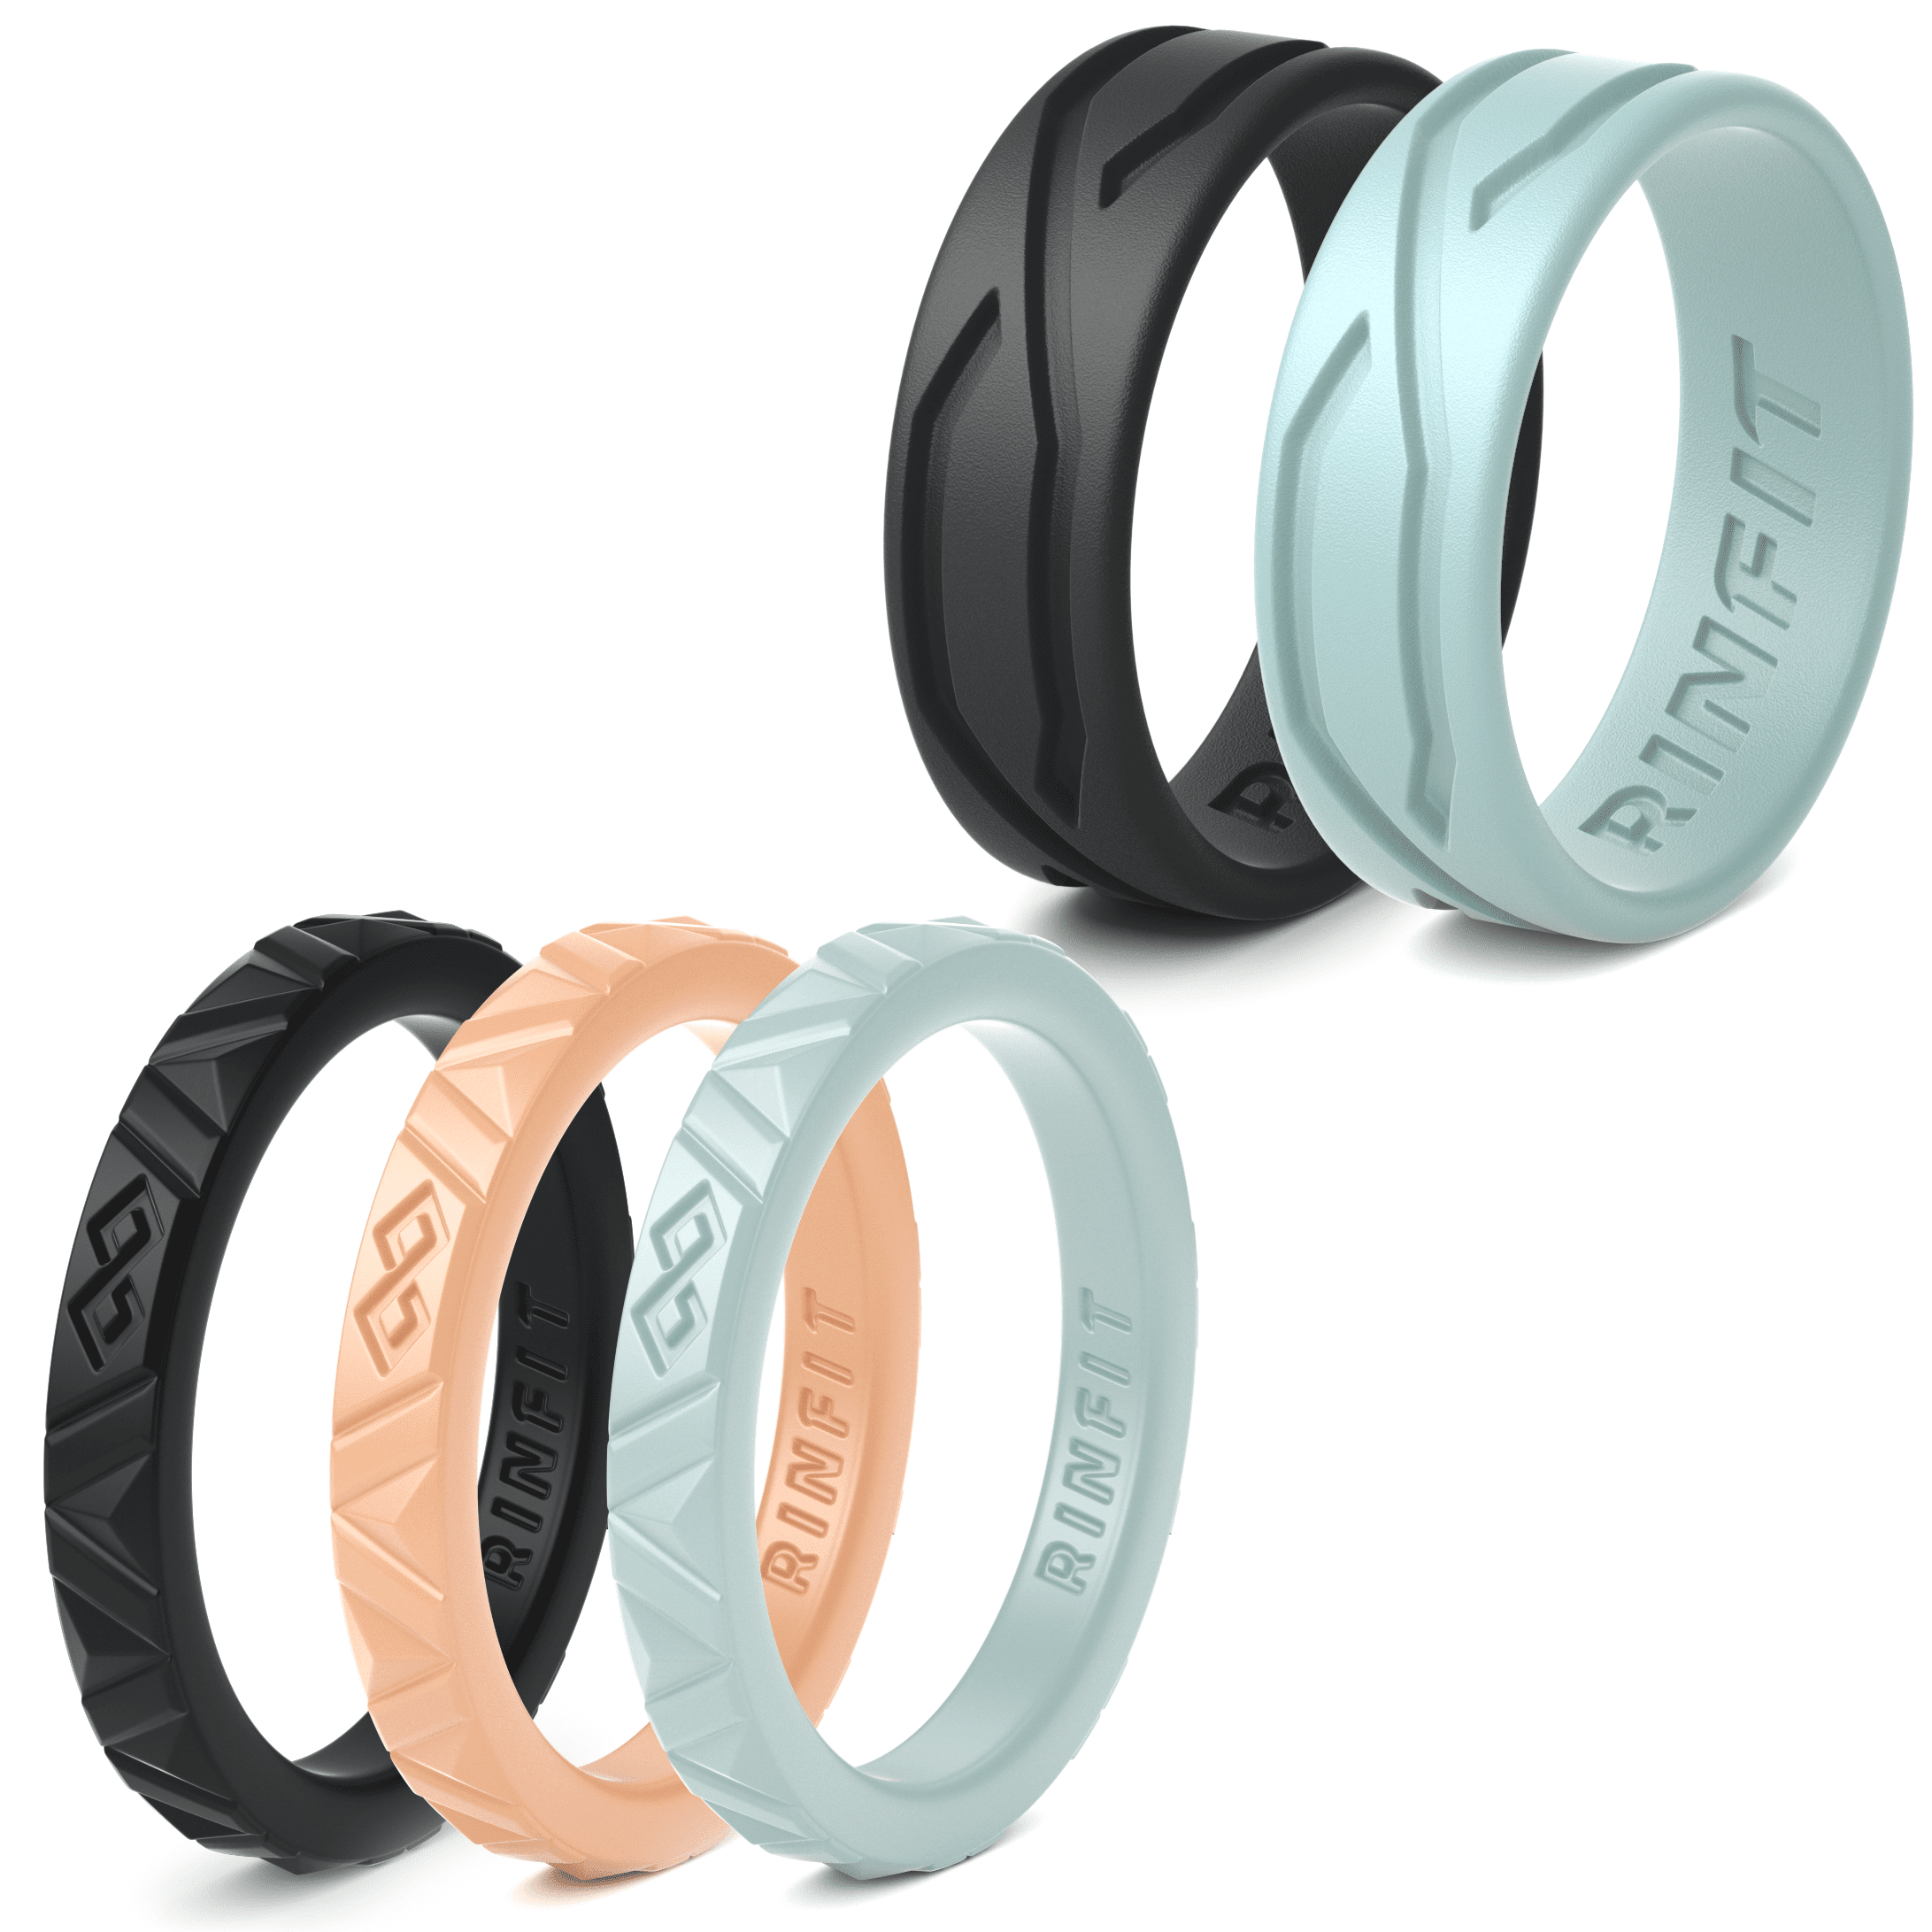 Silicone Wedding Ring/Band Men Women 4 5 Rings Pack- Designed Silicone Rubber Rings U.S Design Patent Matching Sets Comfortable Durable Wedding Ring Replacement 